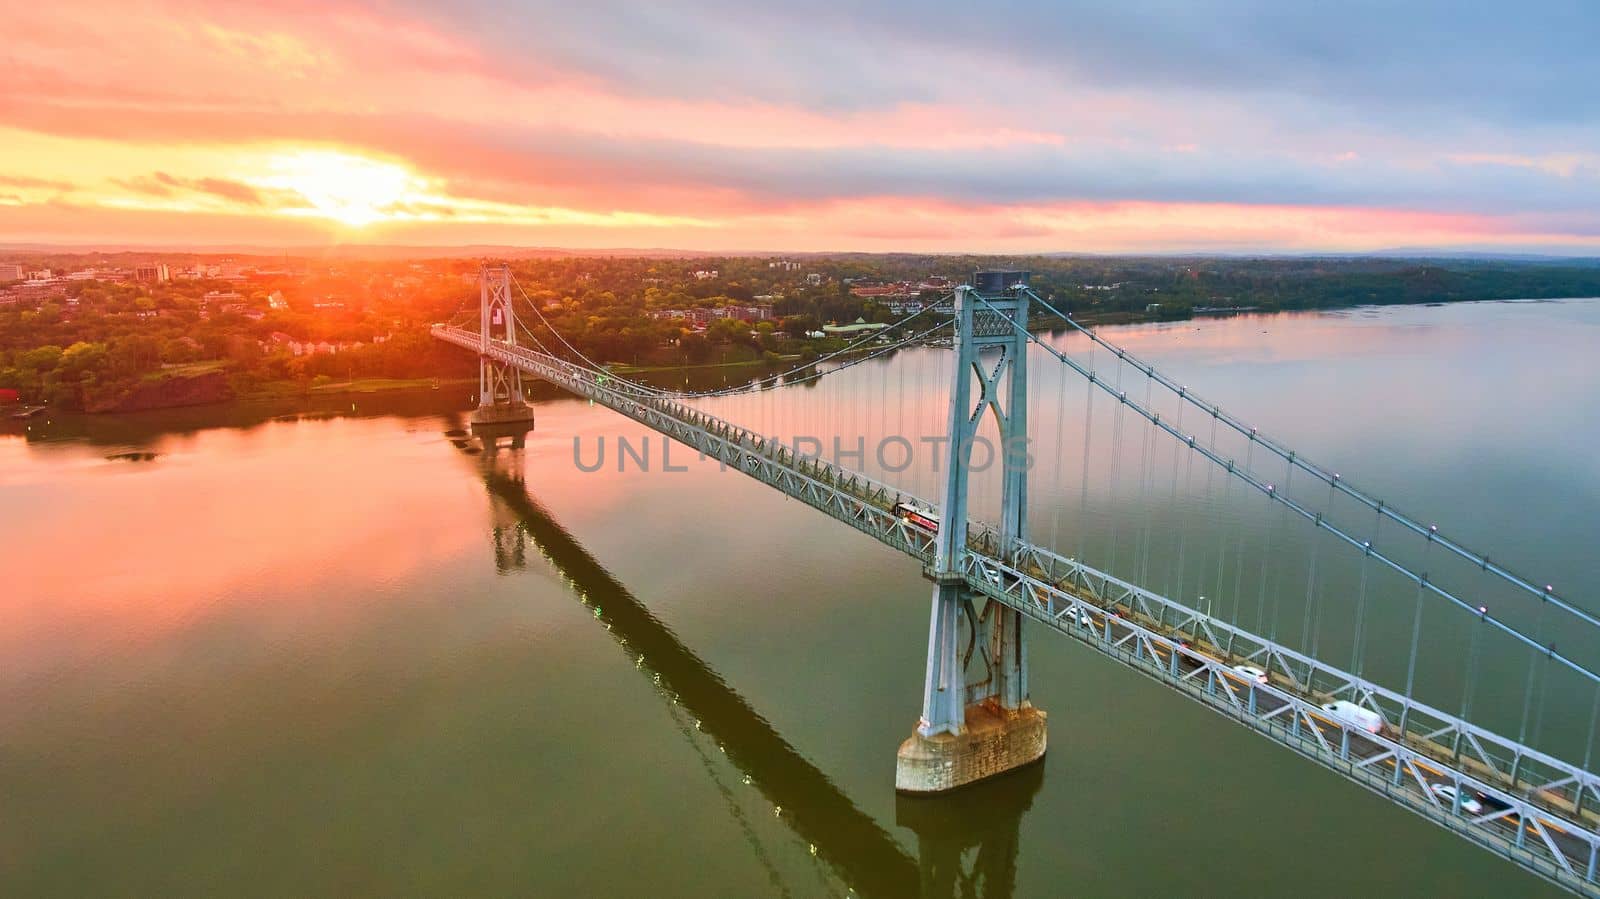 Image of Hudson River bridge aerial with stunning pink and gold sunrise light